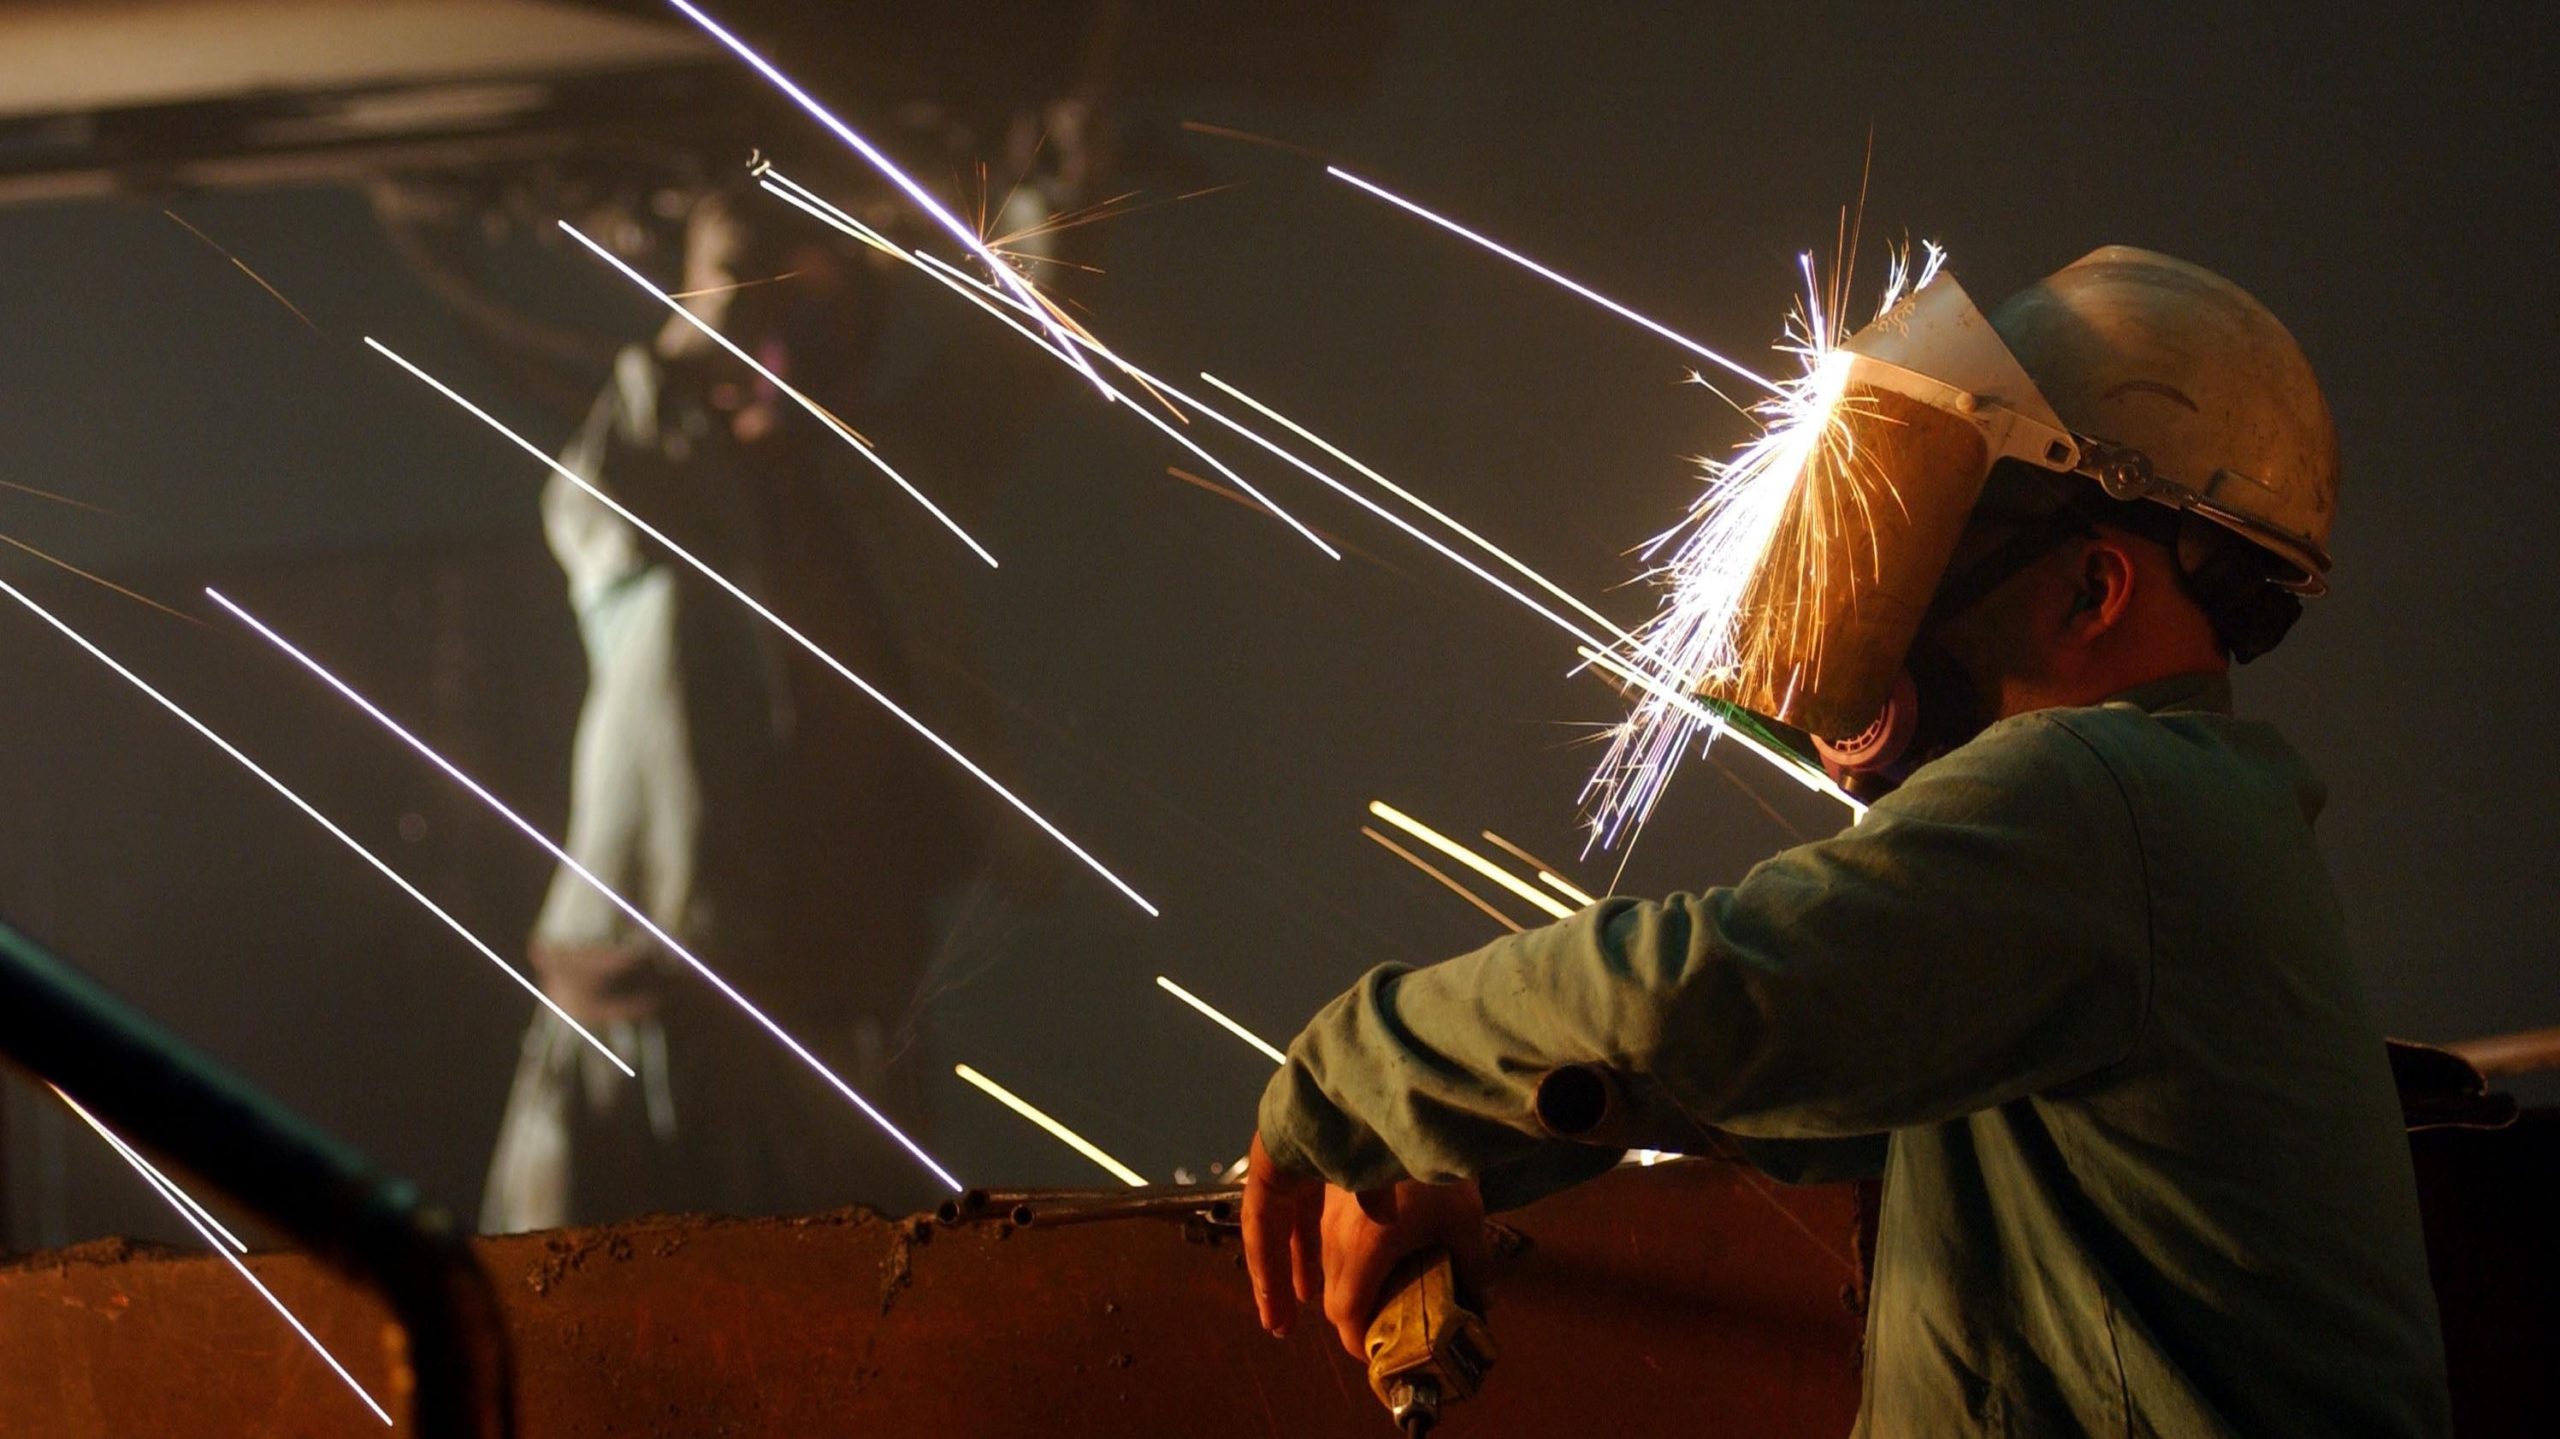 A worker is struck in the face with sparks from molten steel flowing into casts. (Photo: David McNew, Getty Images)